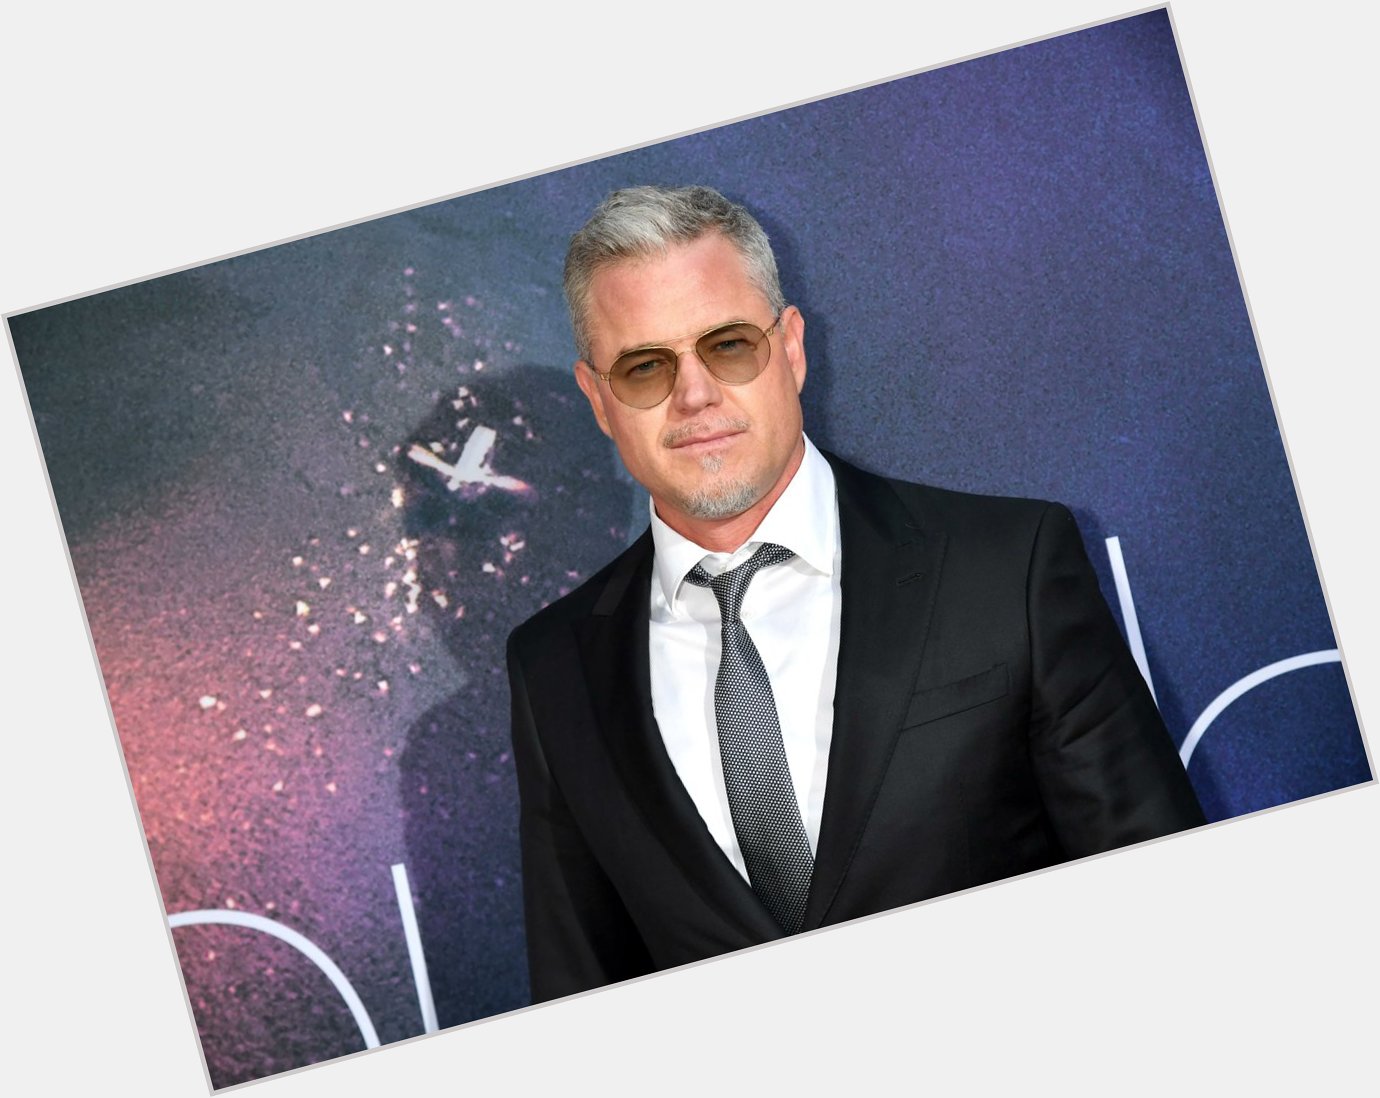 Wishing a happy 50th birthday to Eric Dane!

The actor is best known for his role as Dr. Mark Sloan on 